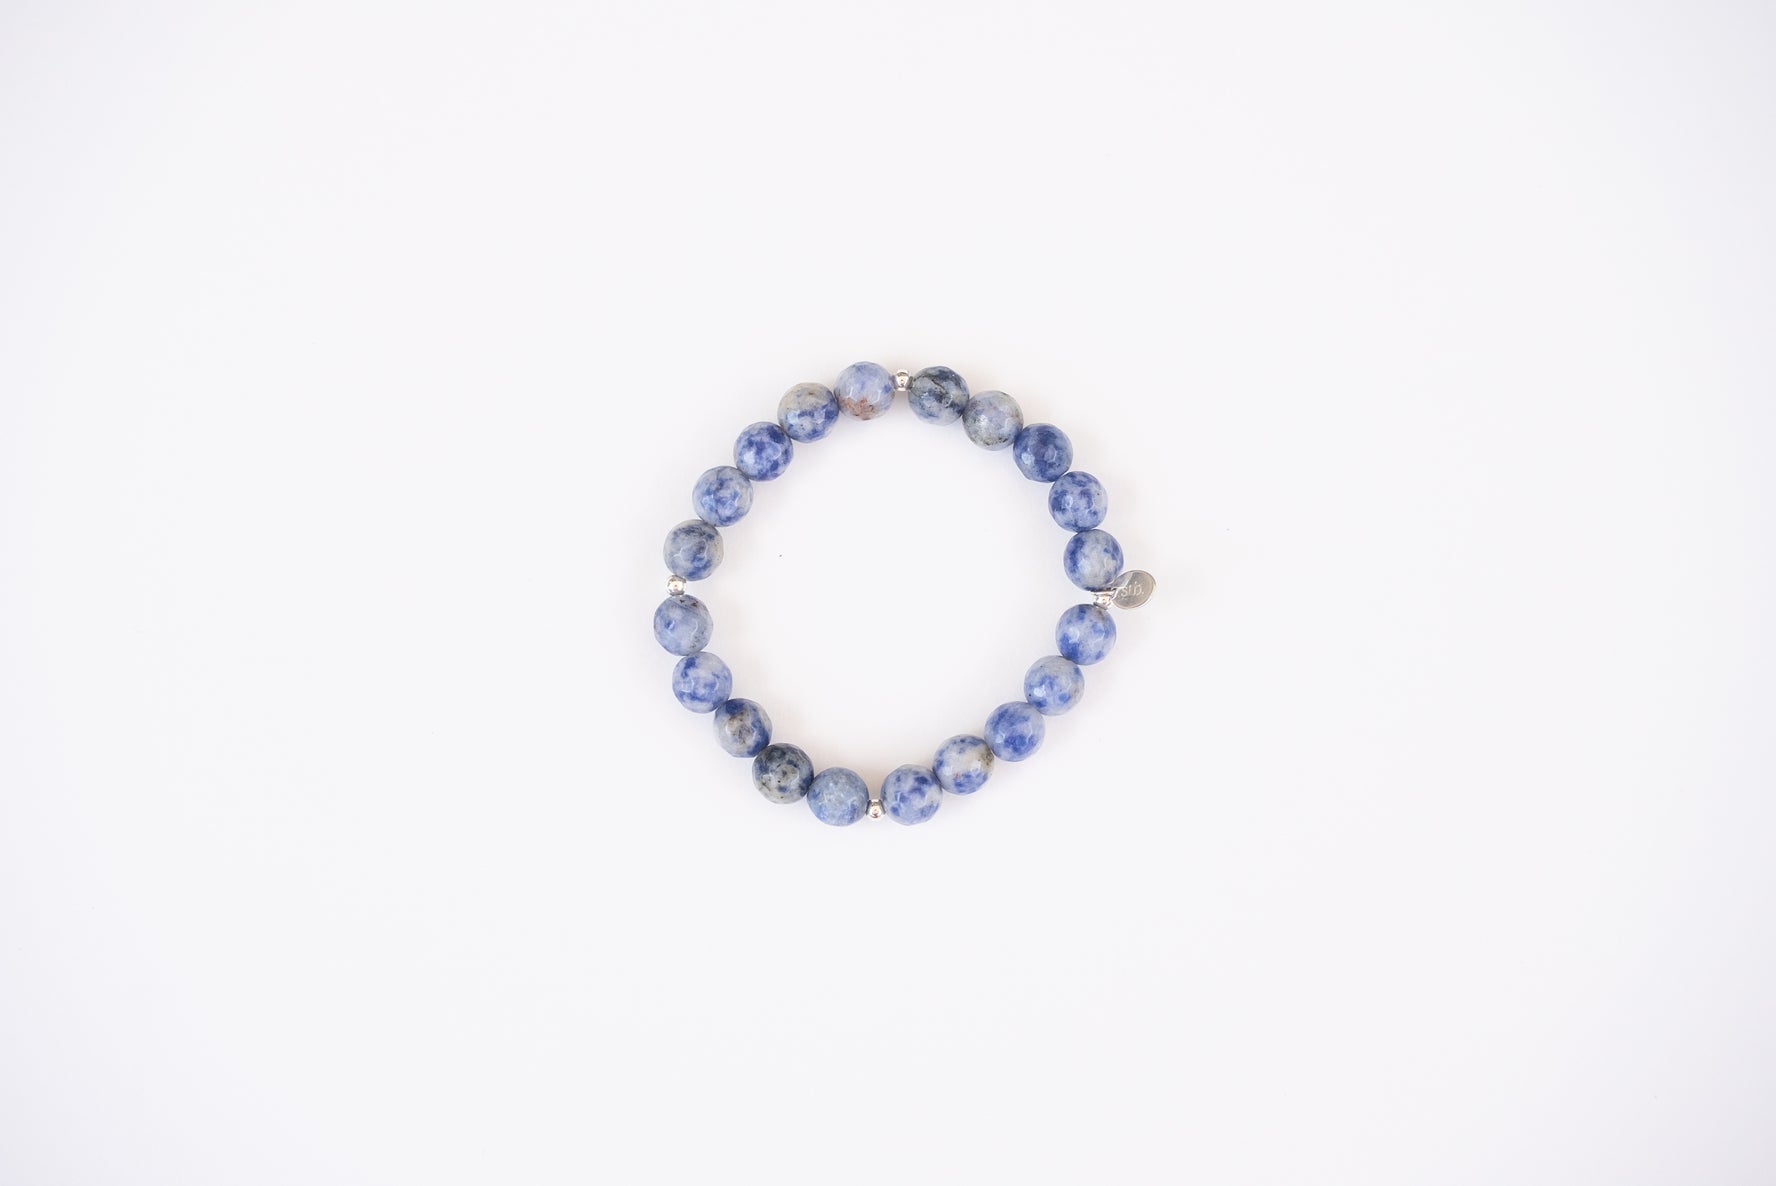 Faceted Round Sodalite 8mm + Silver Accents